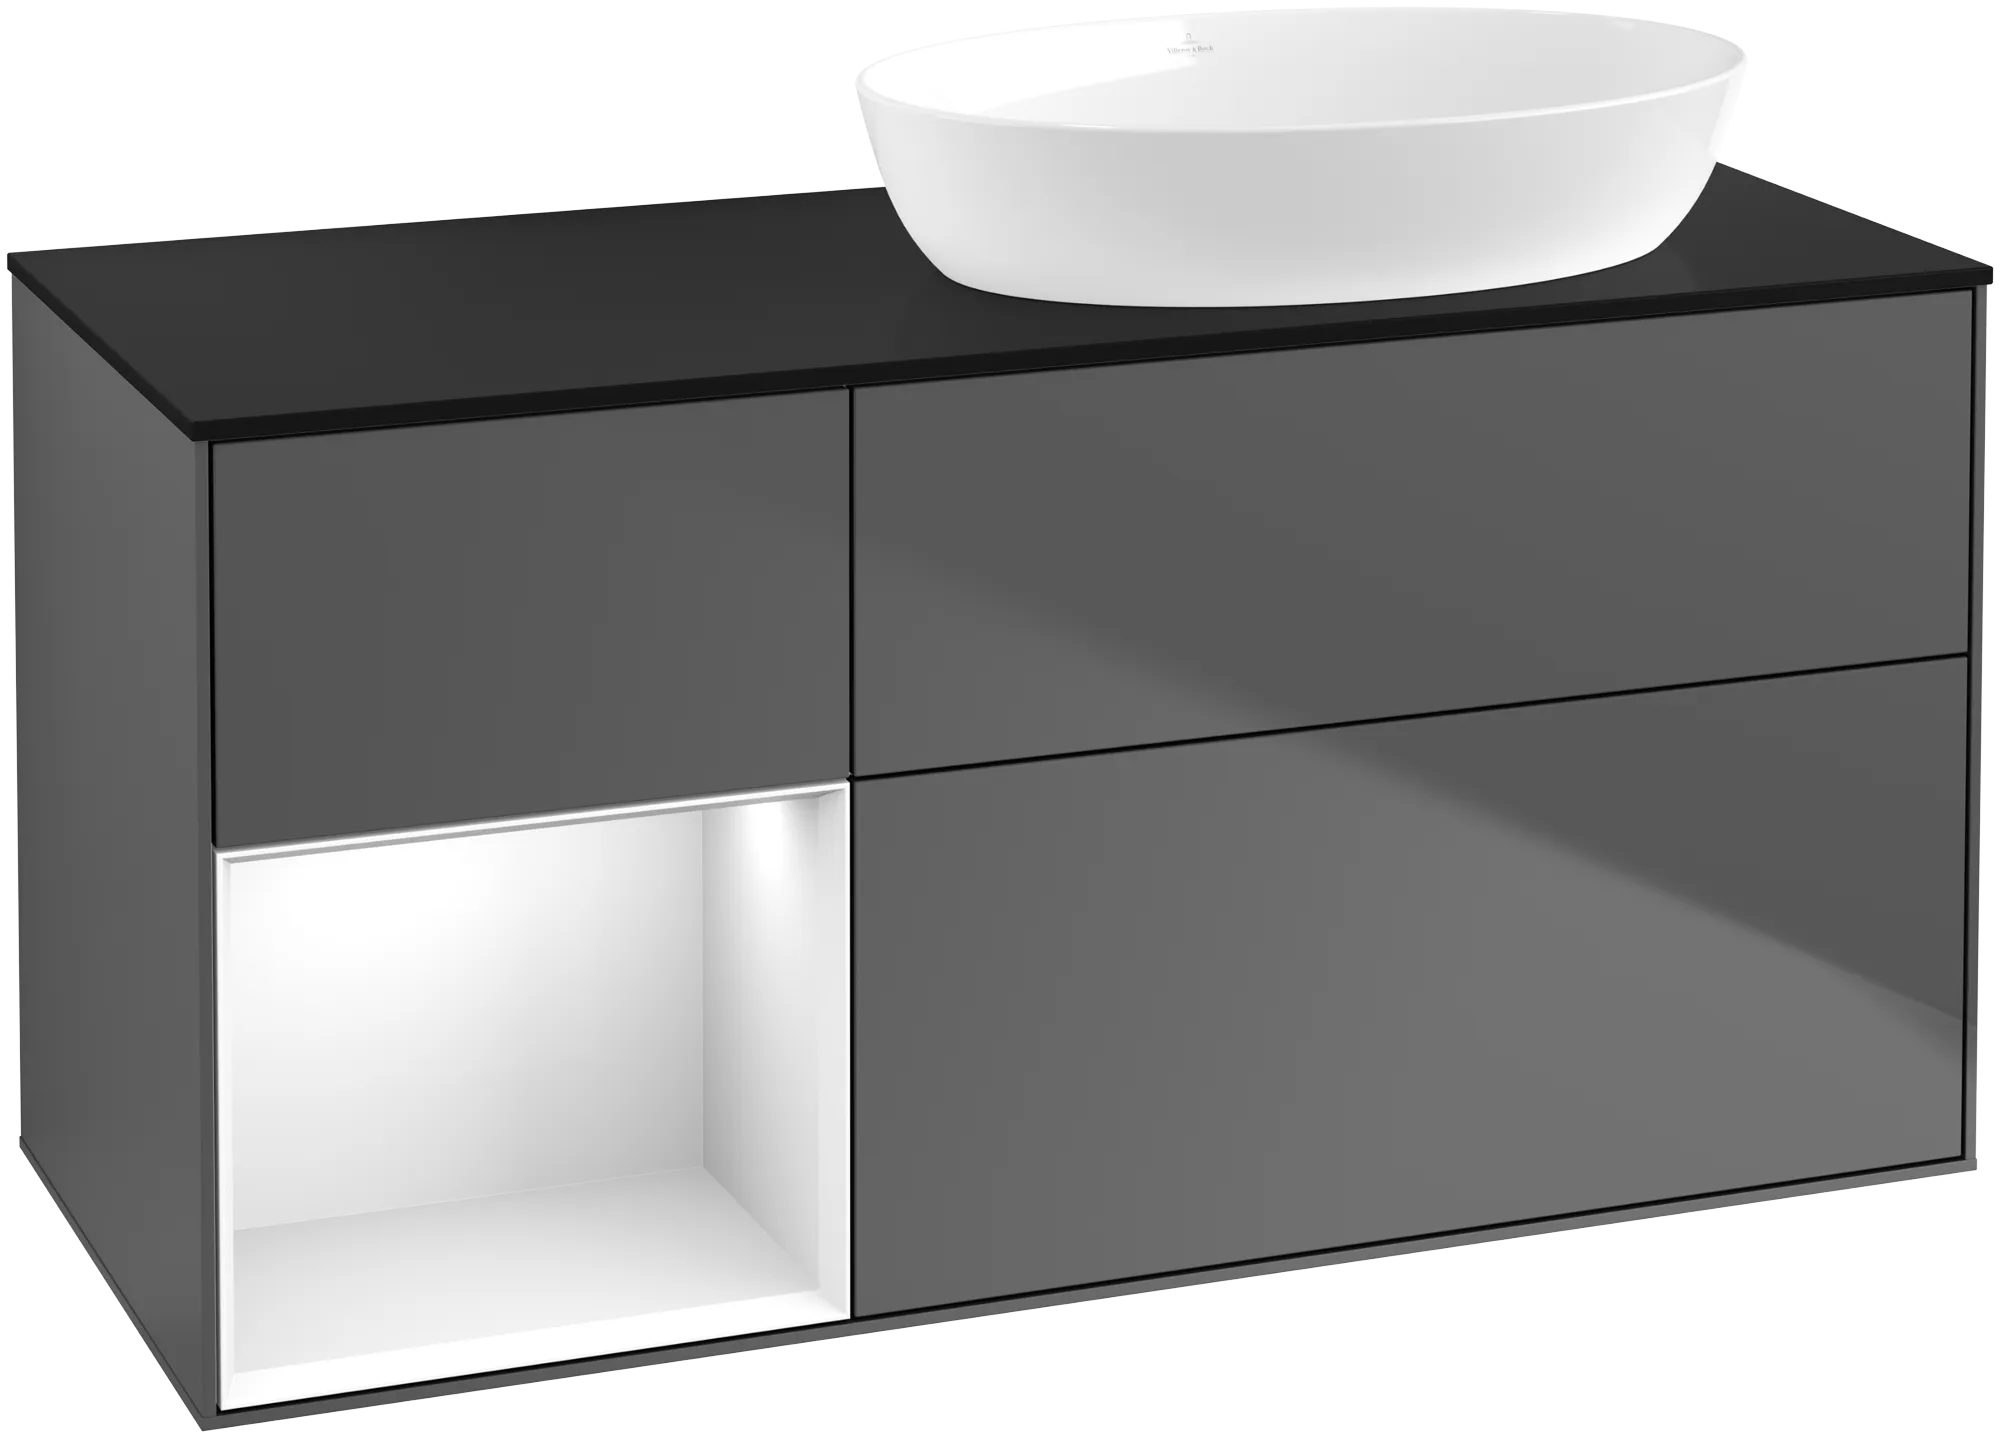 Picture of VILLEROY BOCH Finion Vanity unit, with lighting, 3 pull-out compartments, 1200 x 603 x 501 mm, Anthracite Matt Lacquer / Glossy White Lacquer / Glass Black Matt #GA42GFGK